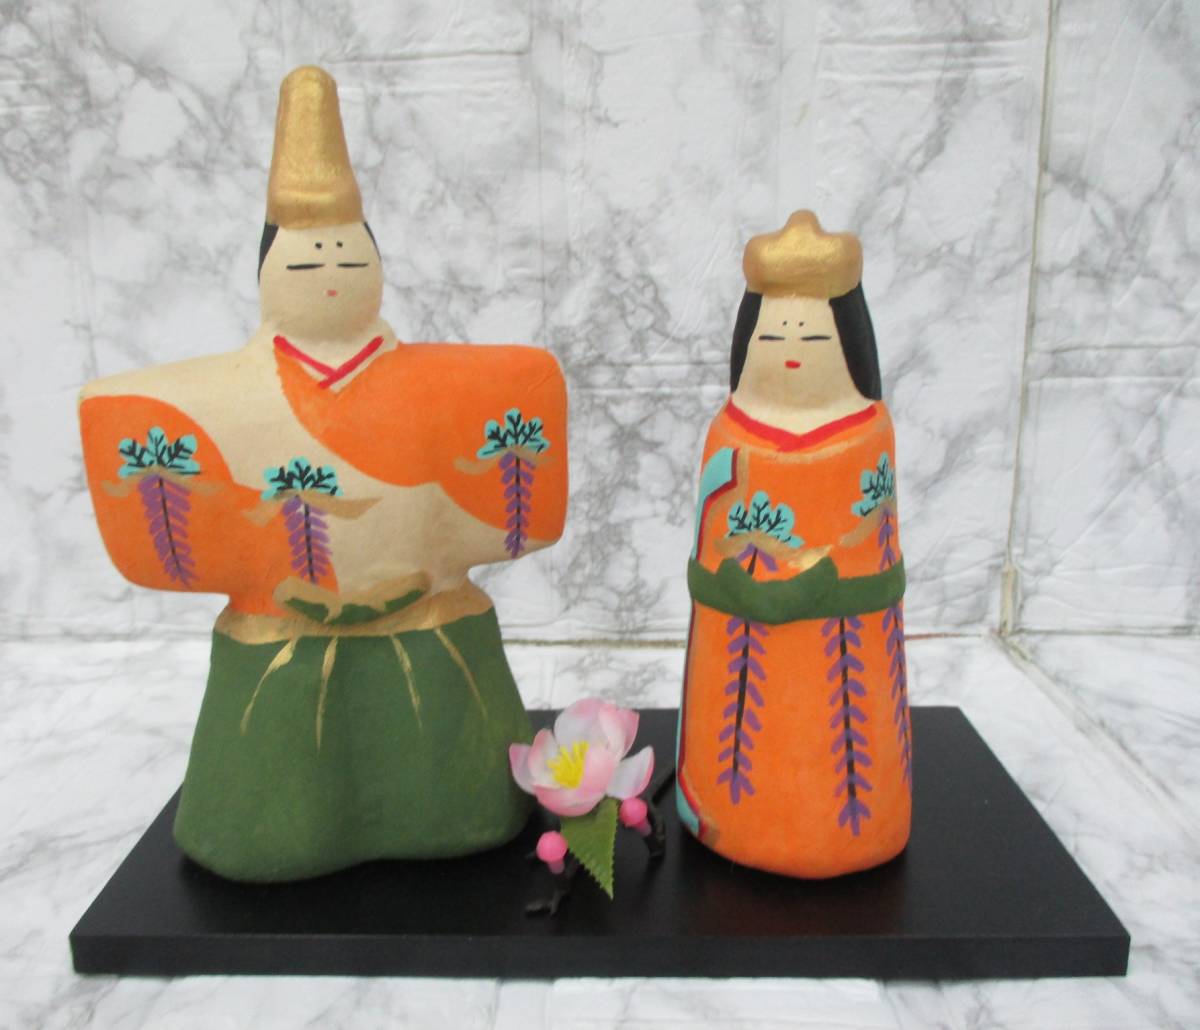 Y.23.K.16 SY ☆ Hina dolls Emperor and Empress, Artist unknown, Box included, USED ☆, season, Annual Events, Doll's Festival, Hina Dolls